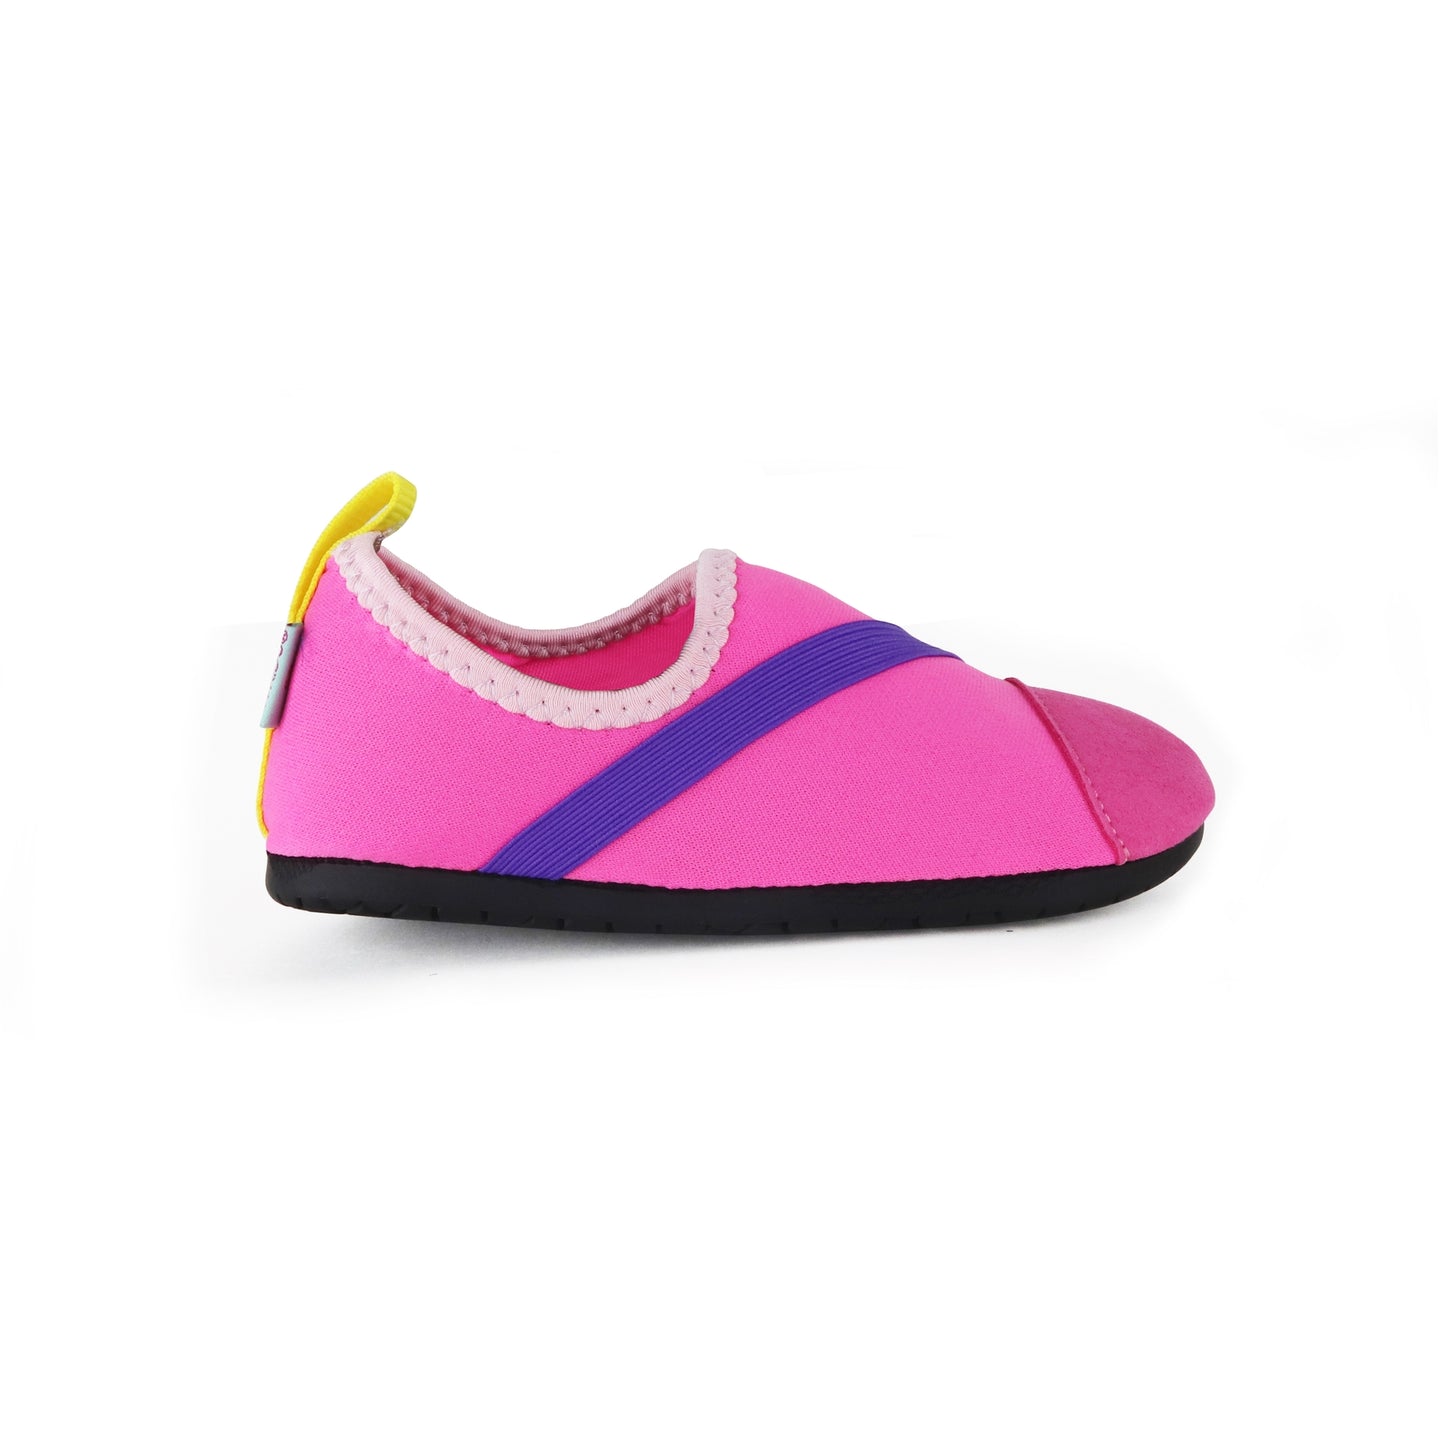 FITKIDS Active Lifestyle Fitkicks Shoes for Kids - Pink